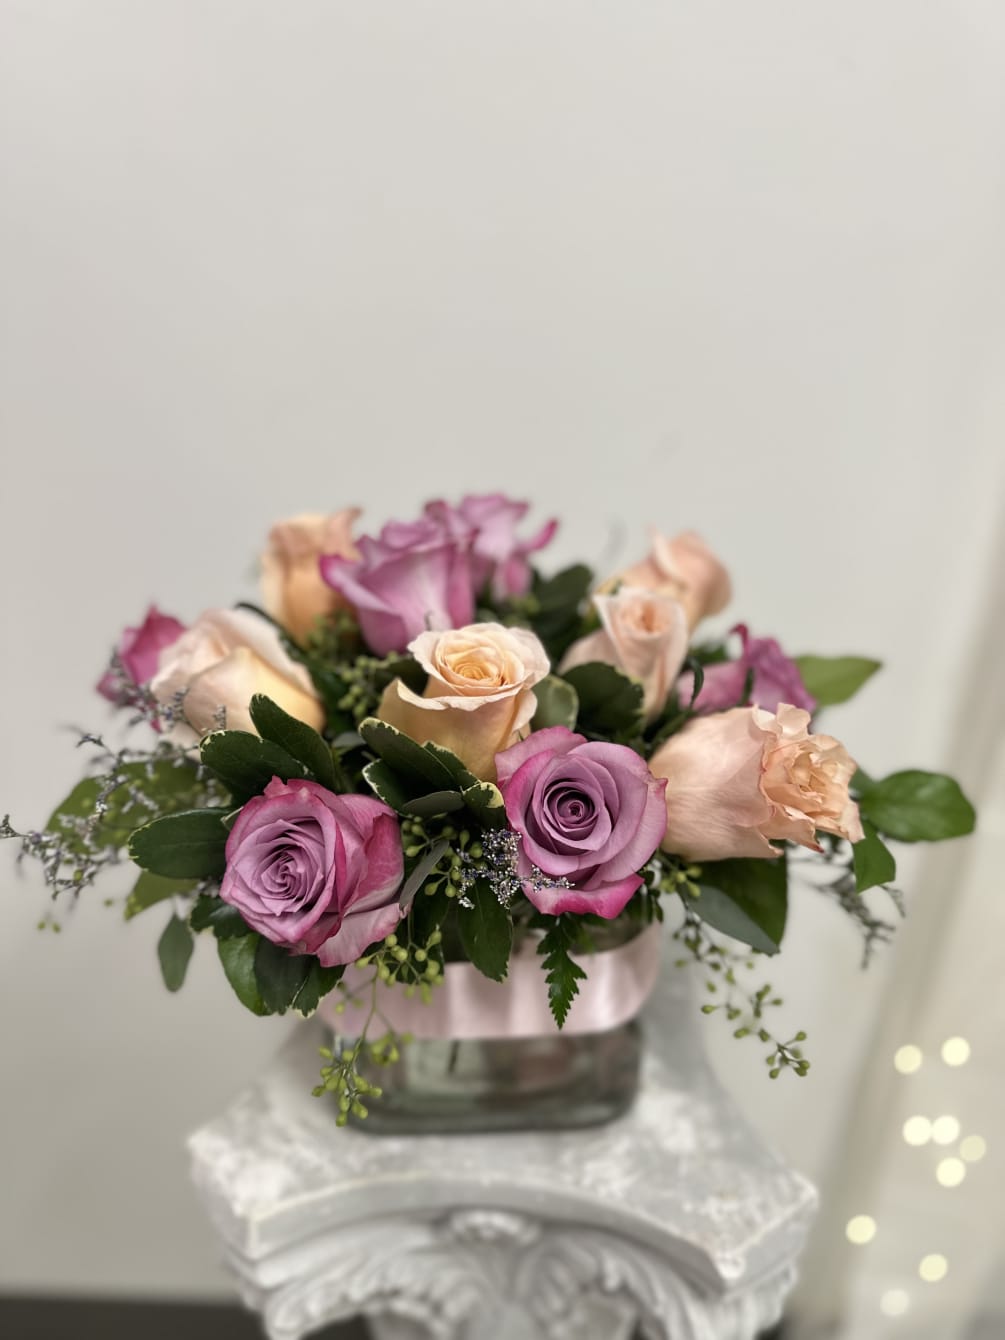 This stunning piece by Westford Florist showcases a beautiful modern design that